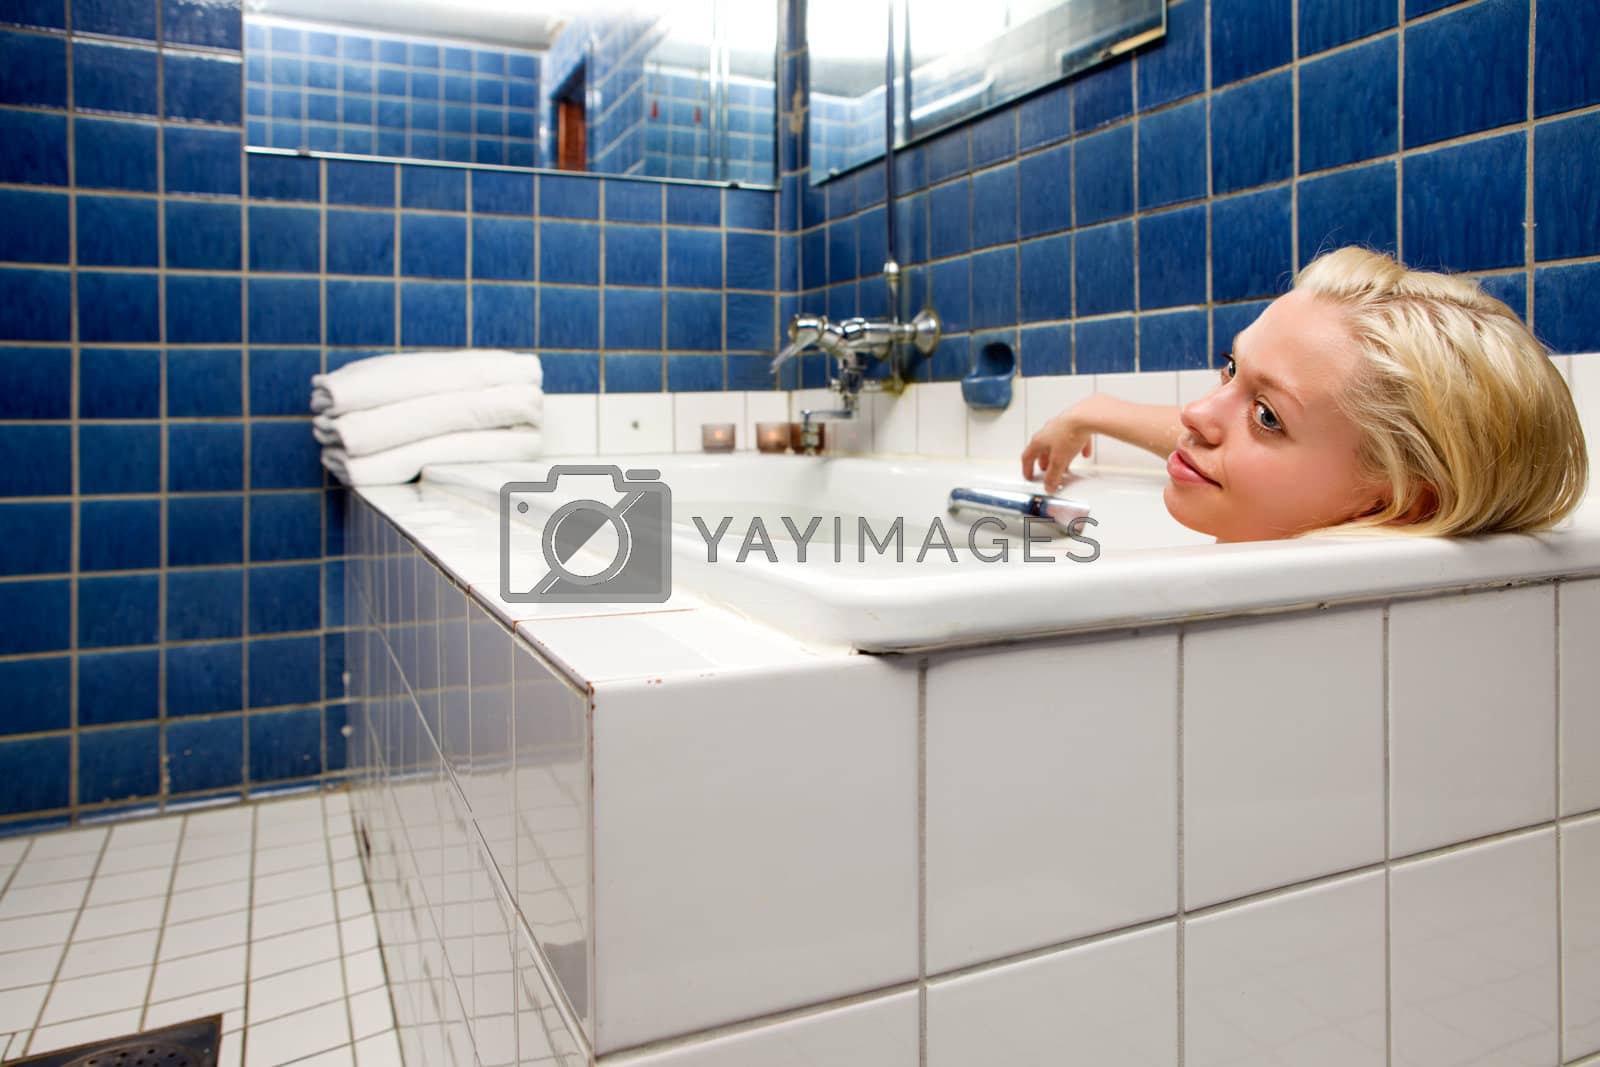 Royalty free image of Woman in Bathtub in Blue Room by leaf